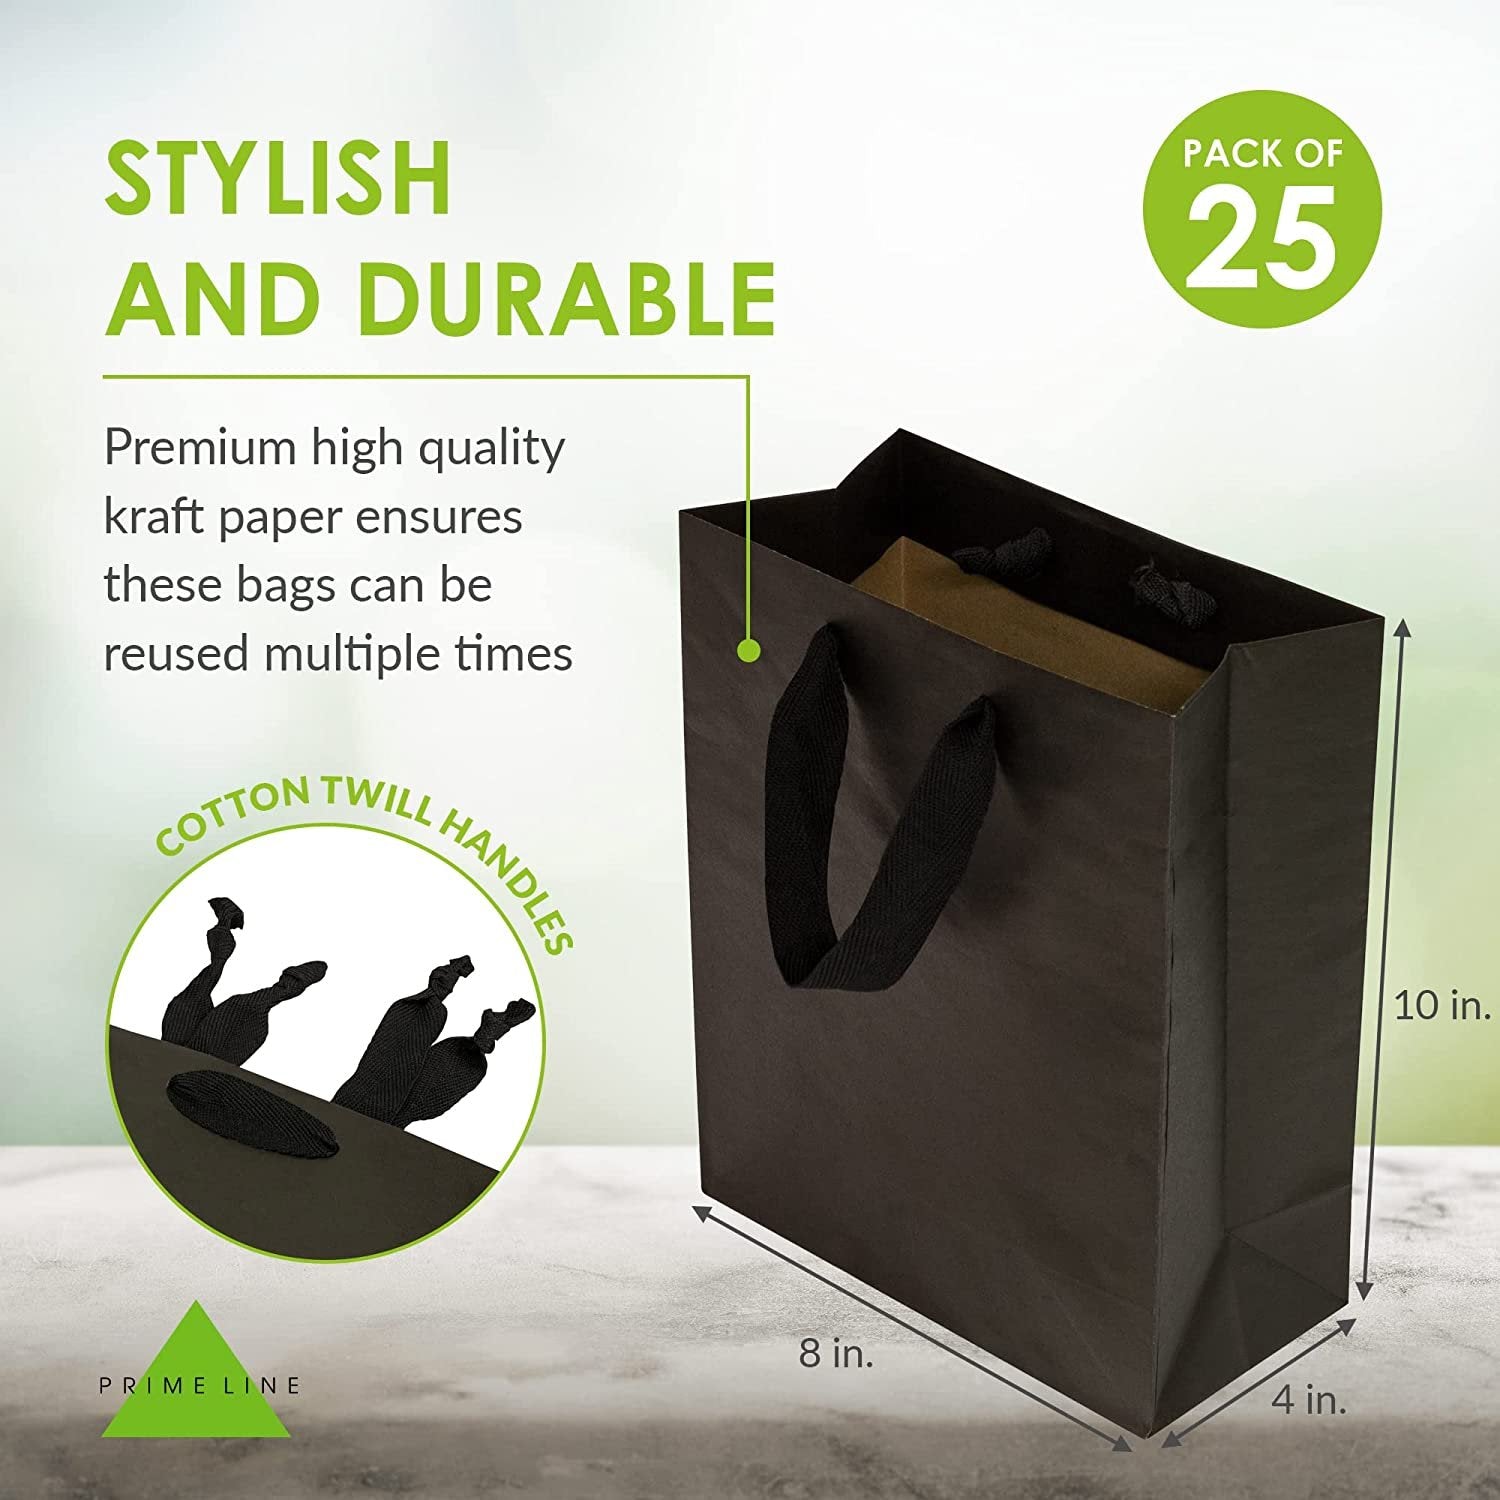 Reusable Gift Bags - 12 Pack Large Totes with Handles, White Eco Friendly Fabric - Size 16x6x12